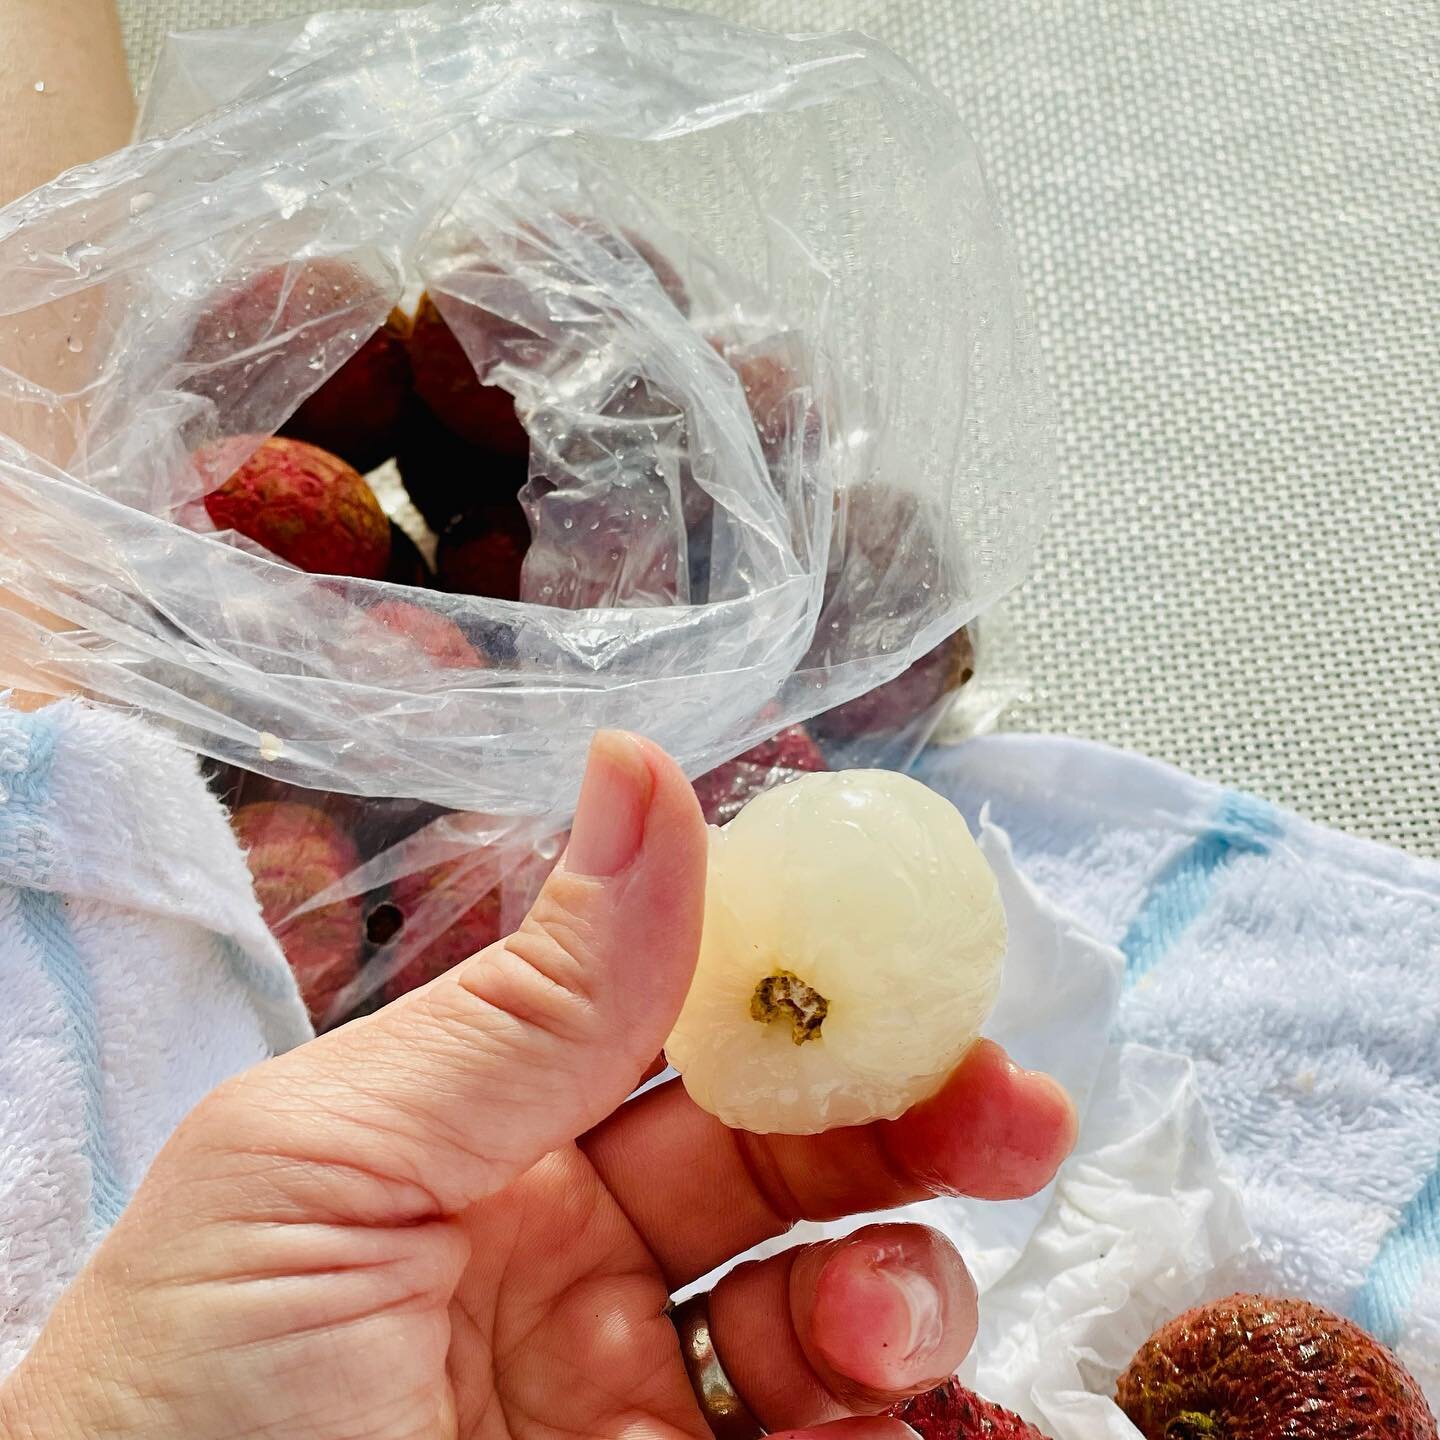 Lychee: Possibly my favorite fruit on earth and I don&rsquo;t get to indulge nearly enough! 

Found tons of them today at a farmer&rsquo;s market in Hilo. High in Vitamin C &amp; fiber. But I eat them because they&rsquo;re fucking delicious and make 